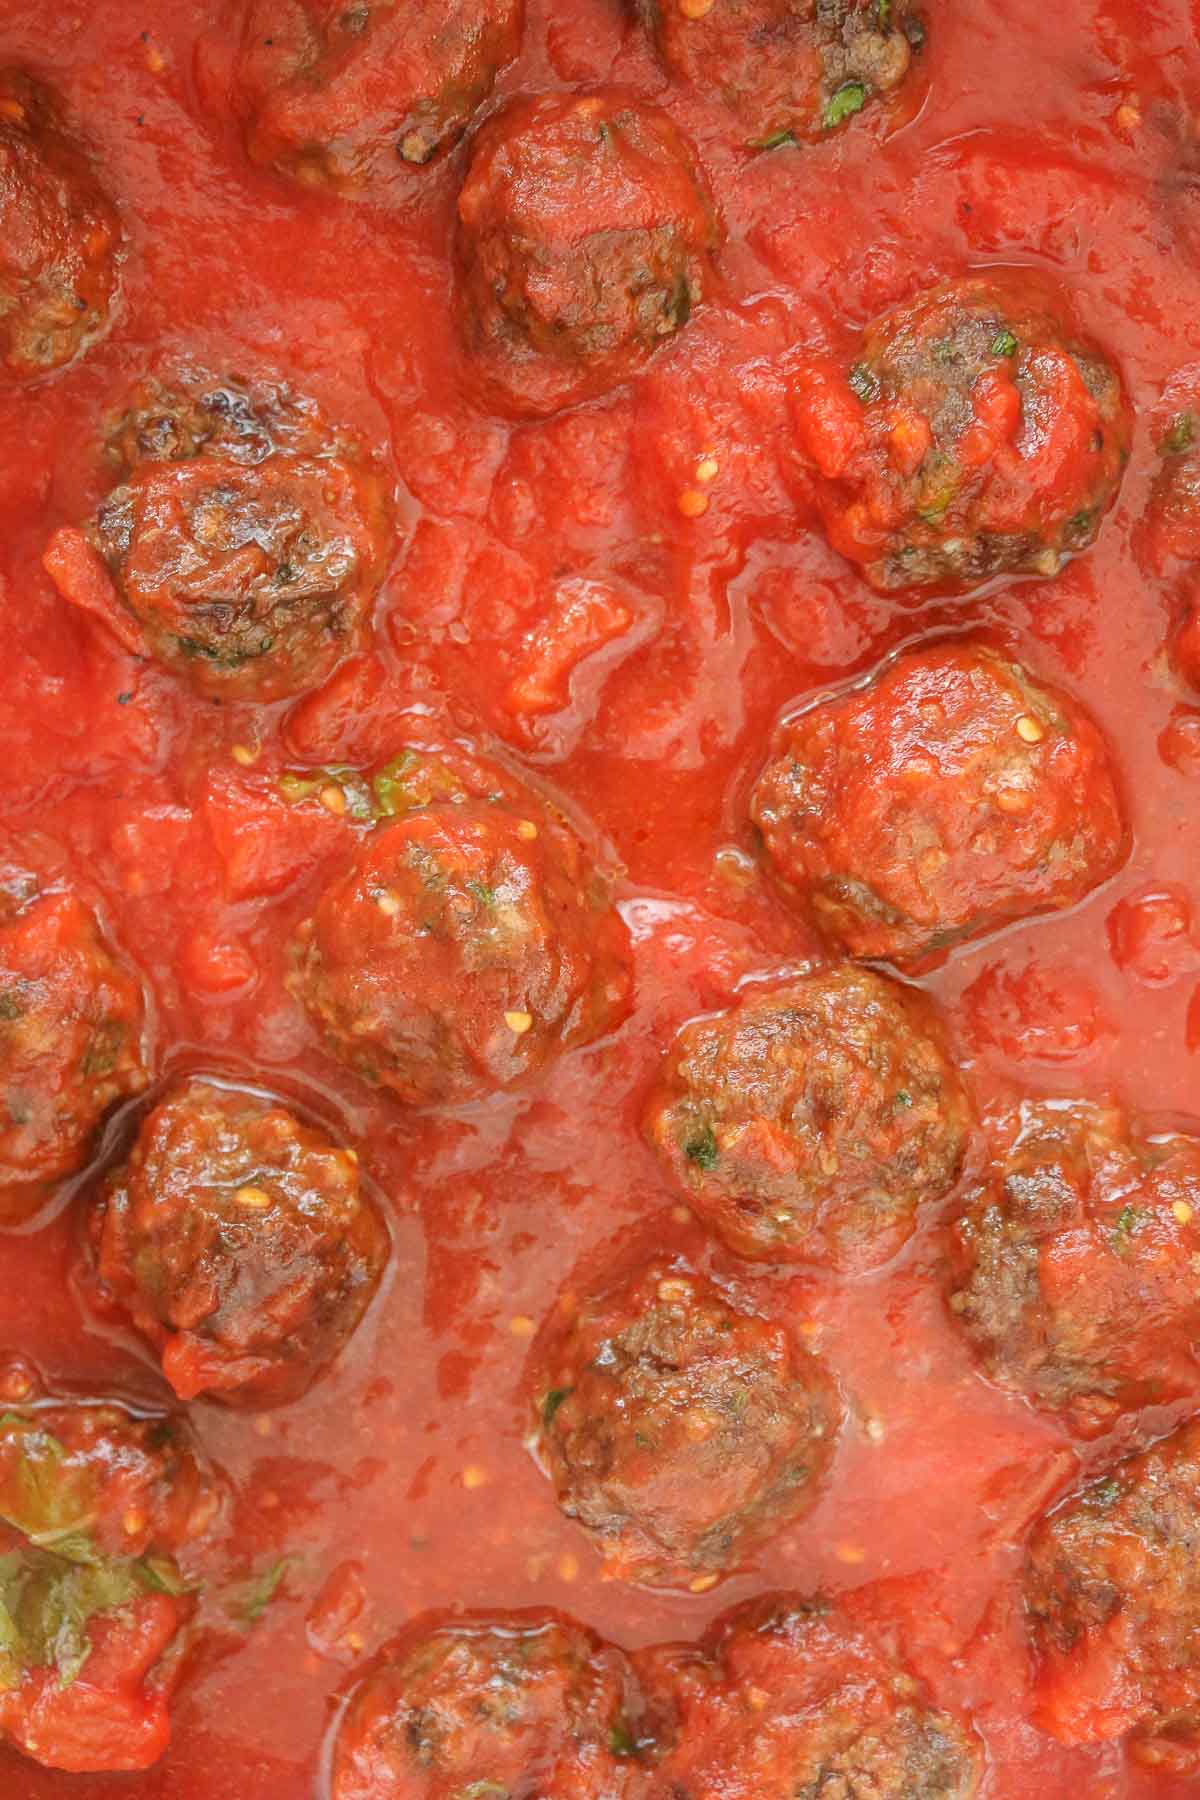 Close-up of meatballs in sauce.